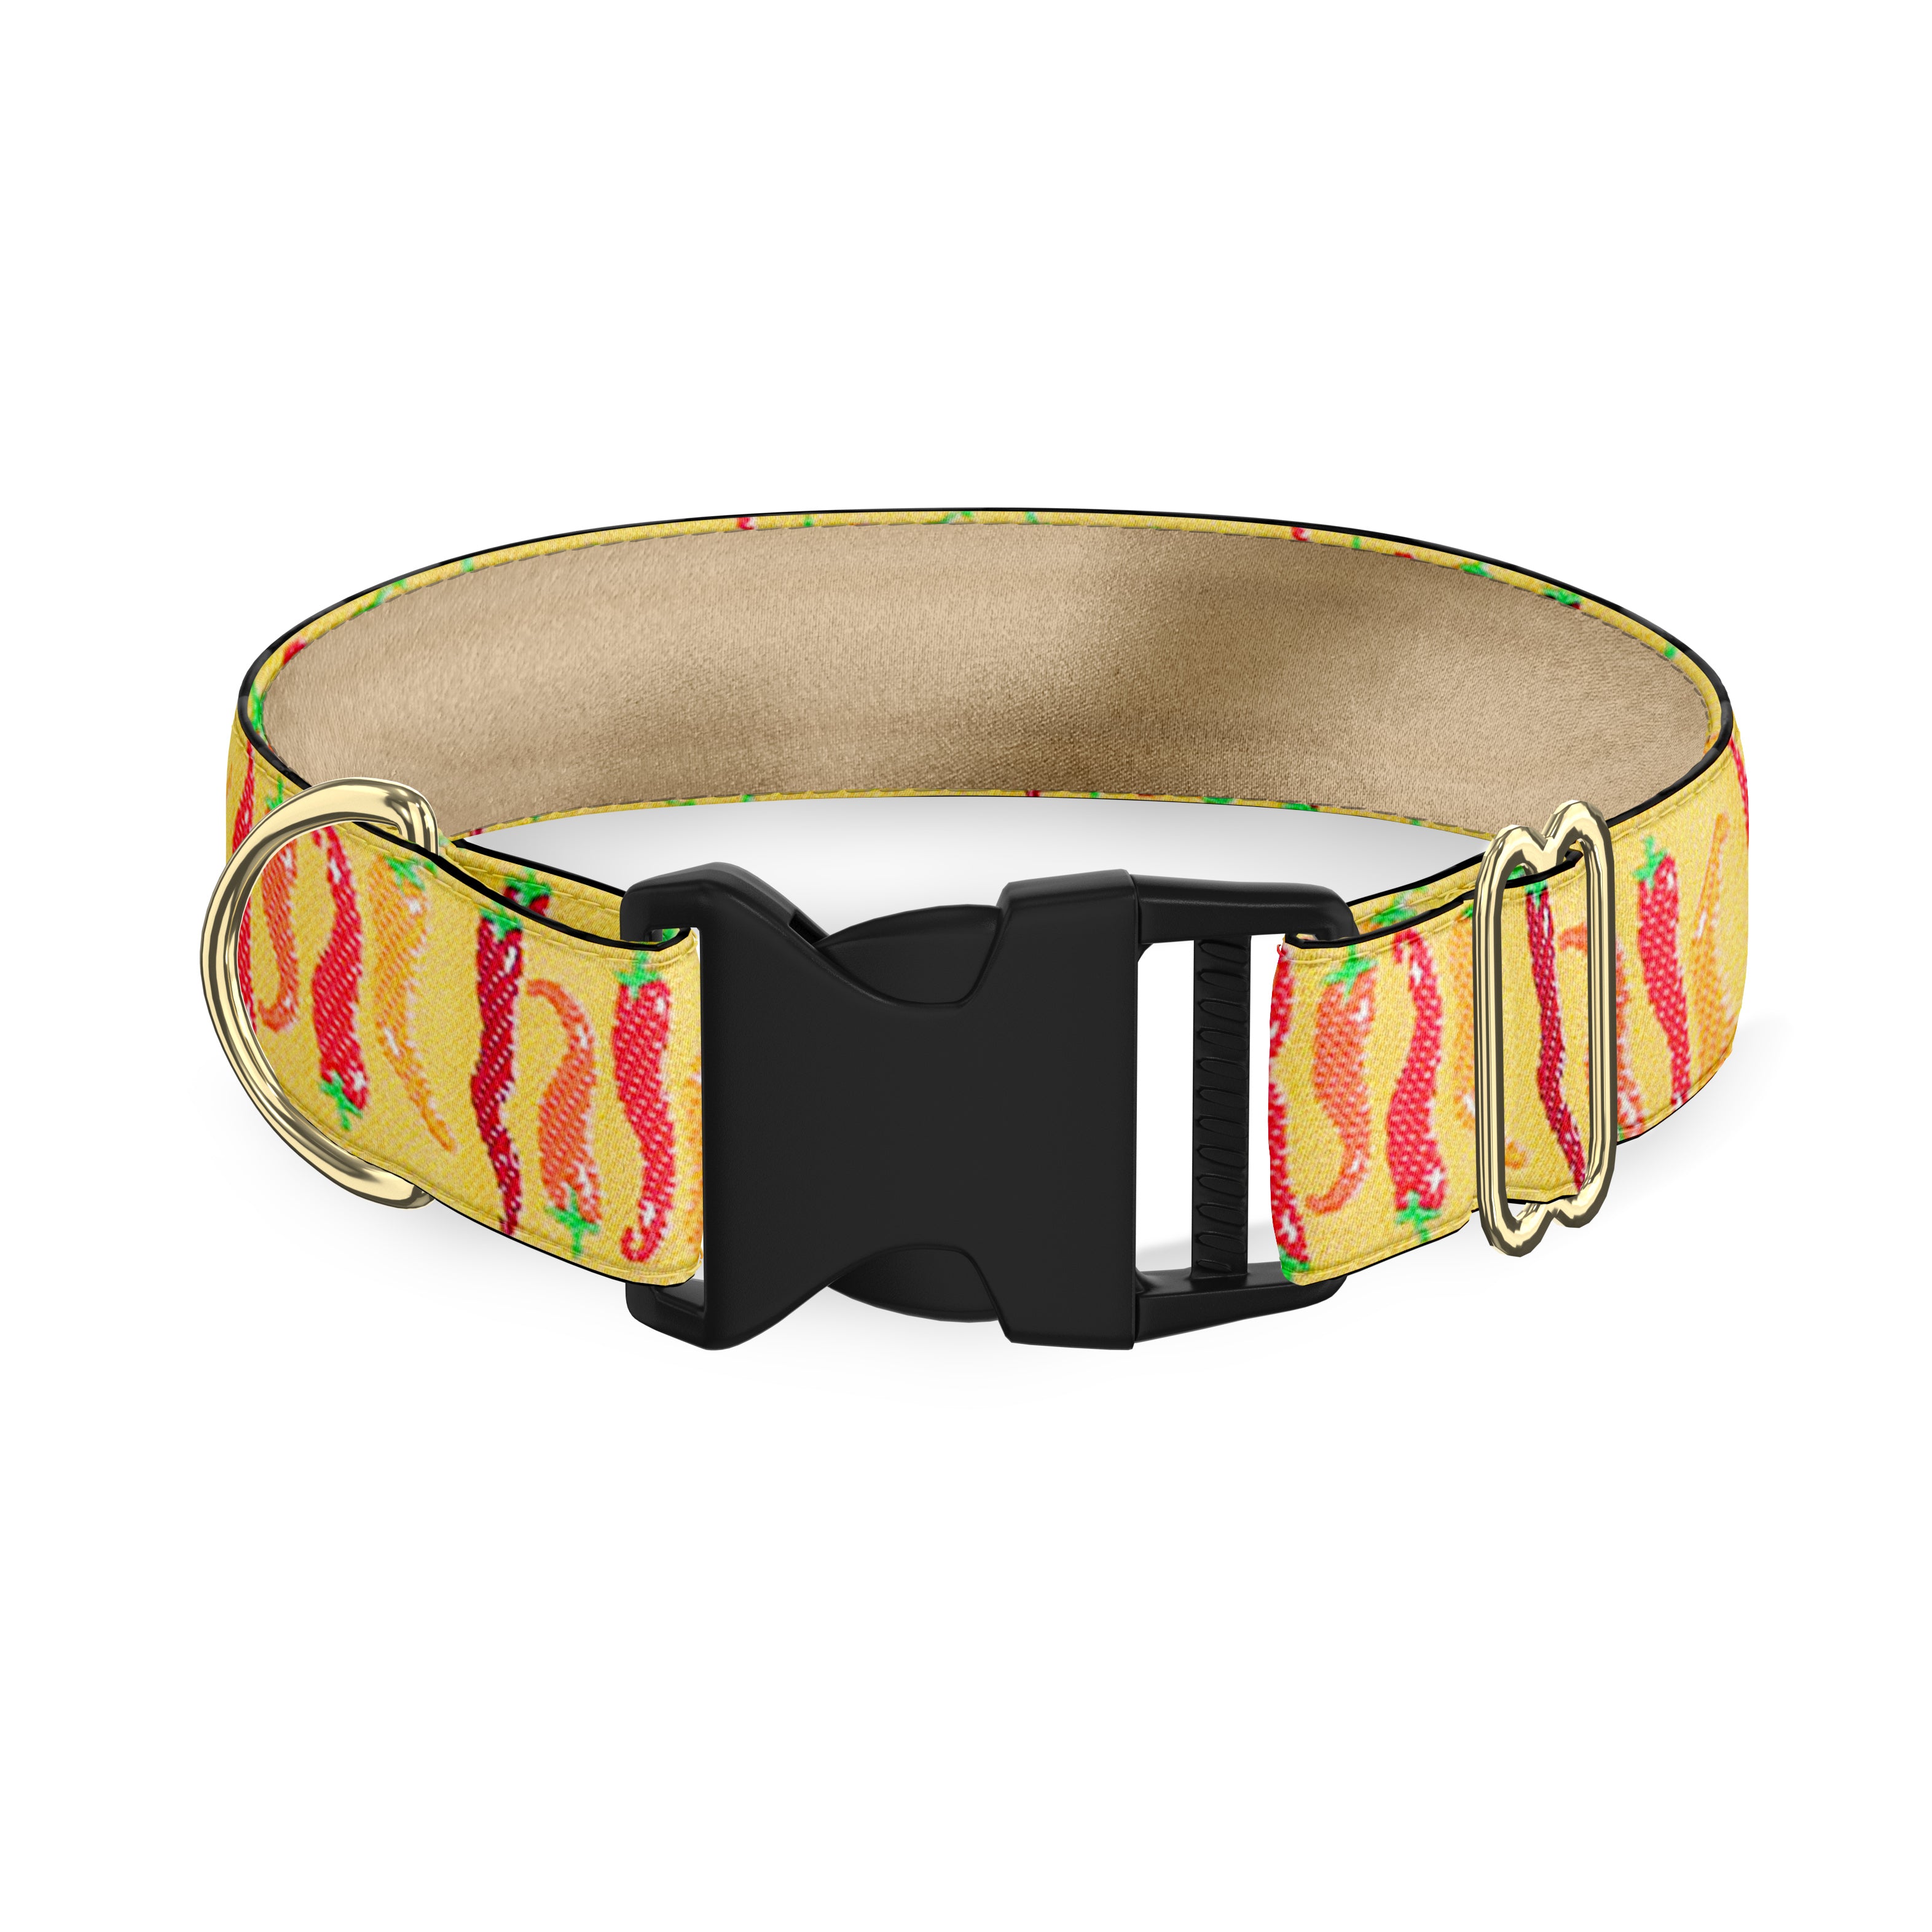 Chili Peppers 1" Dog Collar